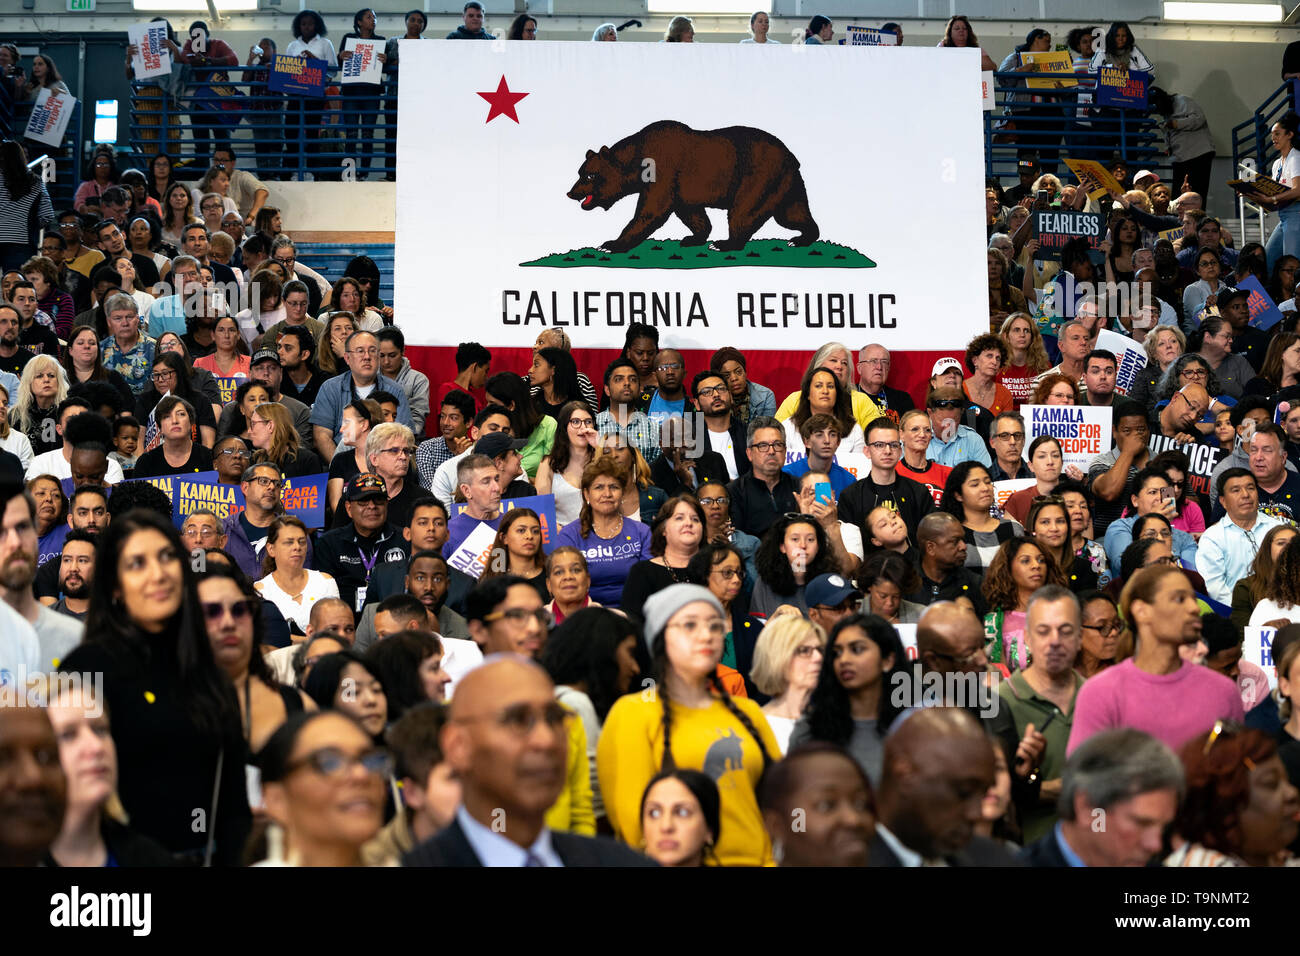 Los Angeles, California, USA. 19th May, 2019. Supporters of Democratic presidential candidate U.S. Senator Kamala Harris seen during a campaign rally in Los Angeles. This was Harris's first campaign rally in Los Angeles since she announced her candidacy for the President of the United States. The candidate spoke about the need to combat gun violence, raise teacher pay and provide middle class tax relief. Credit: SOPA Images Limited/Alamy Live News Stock Photo